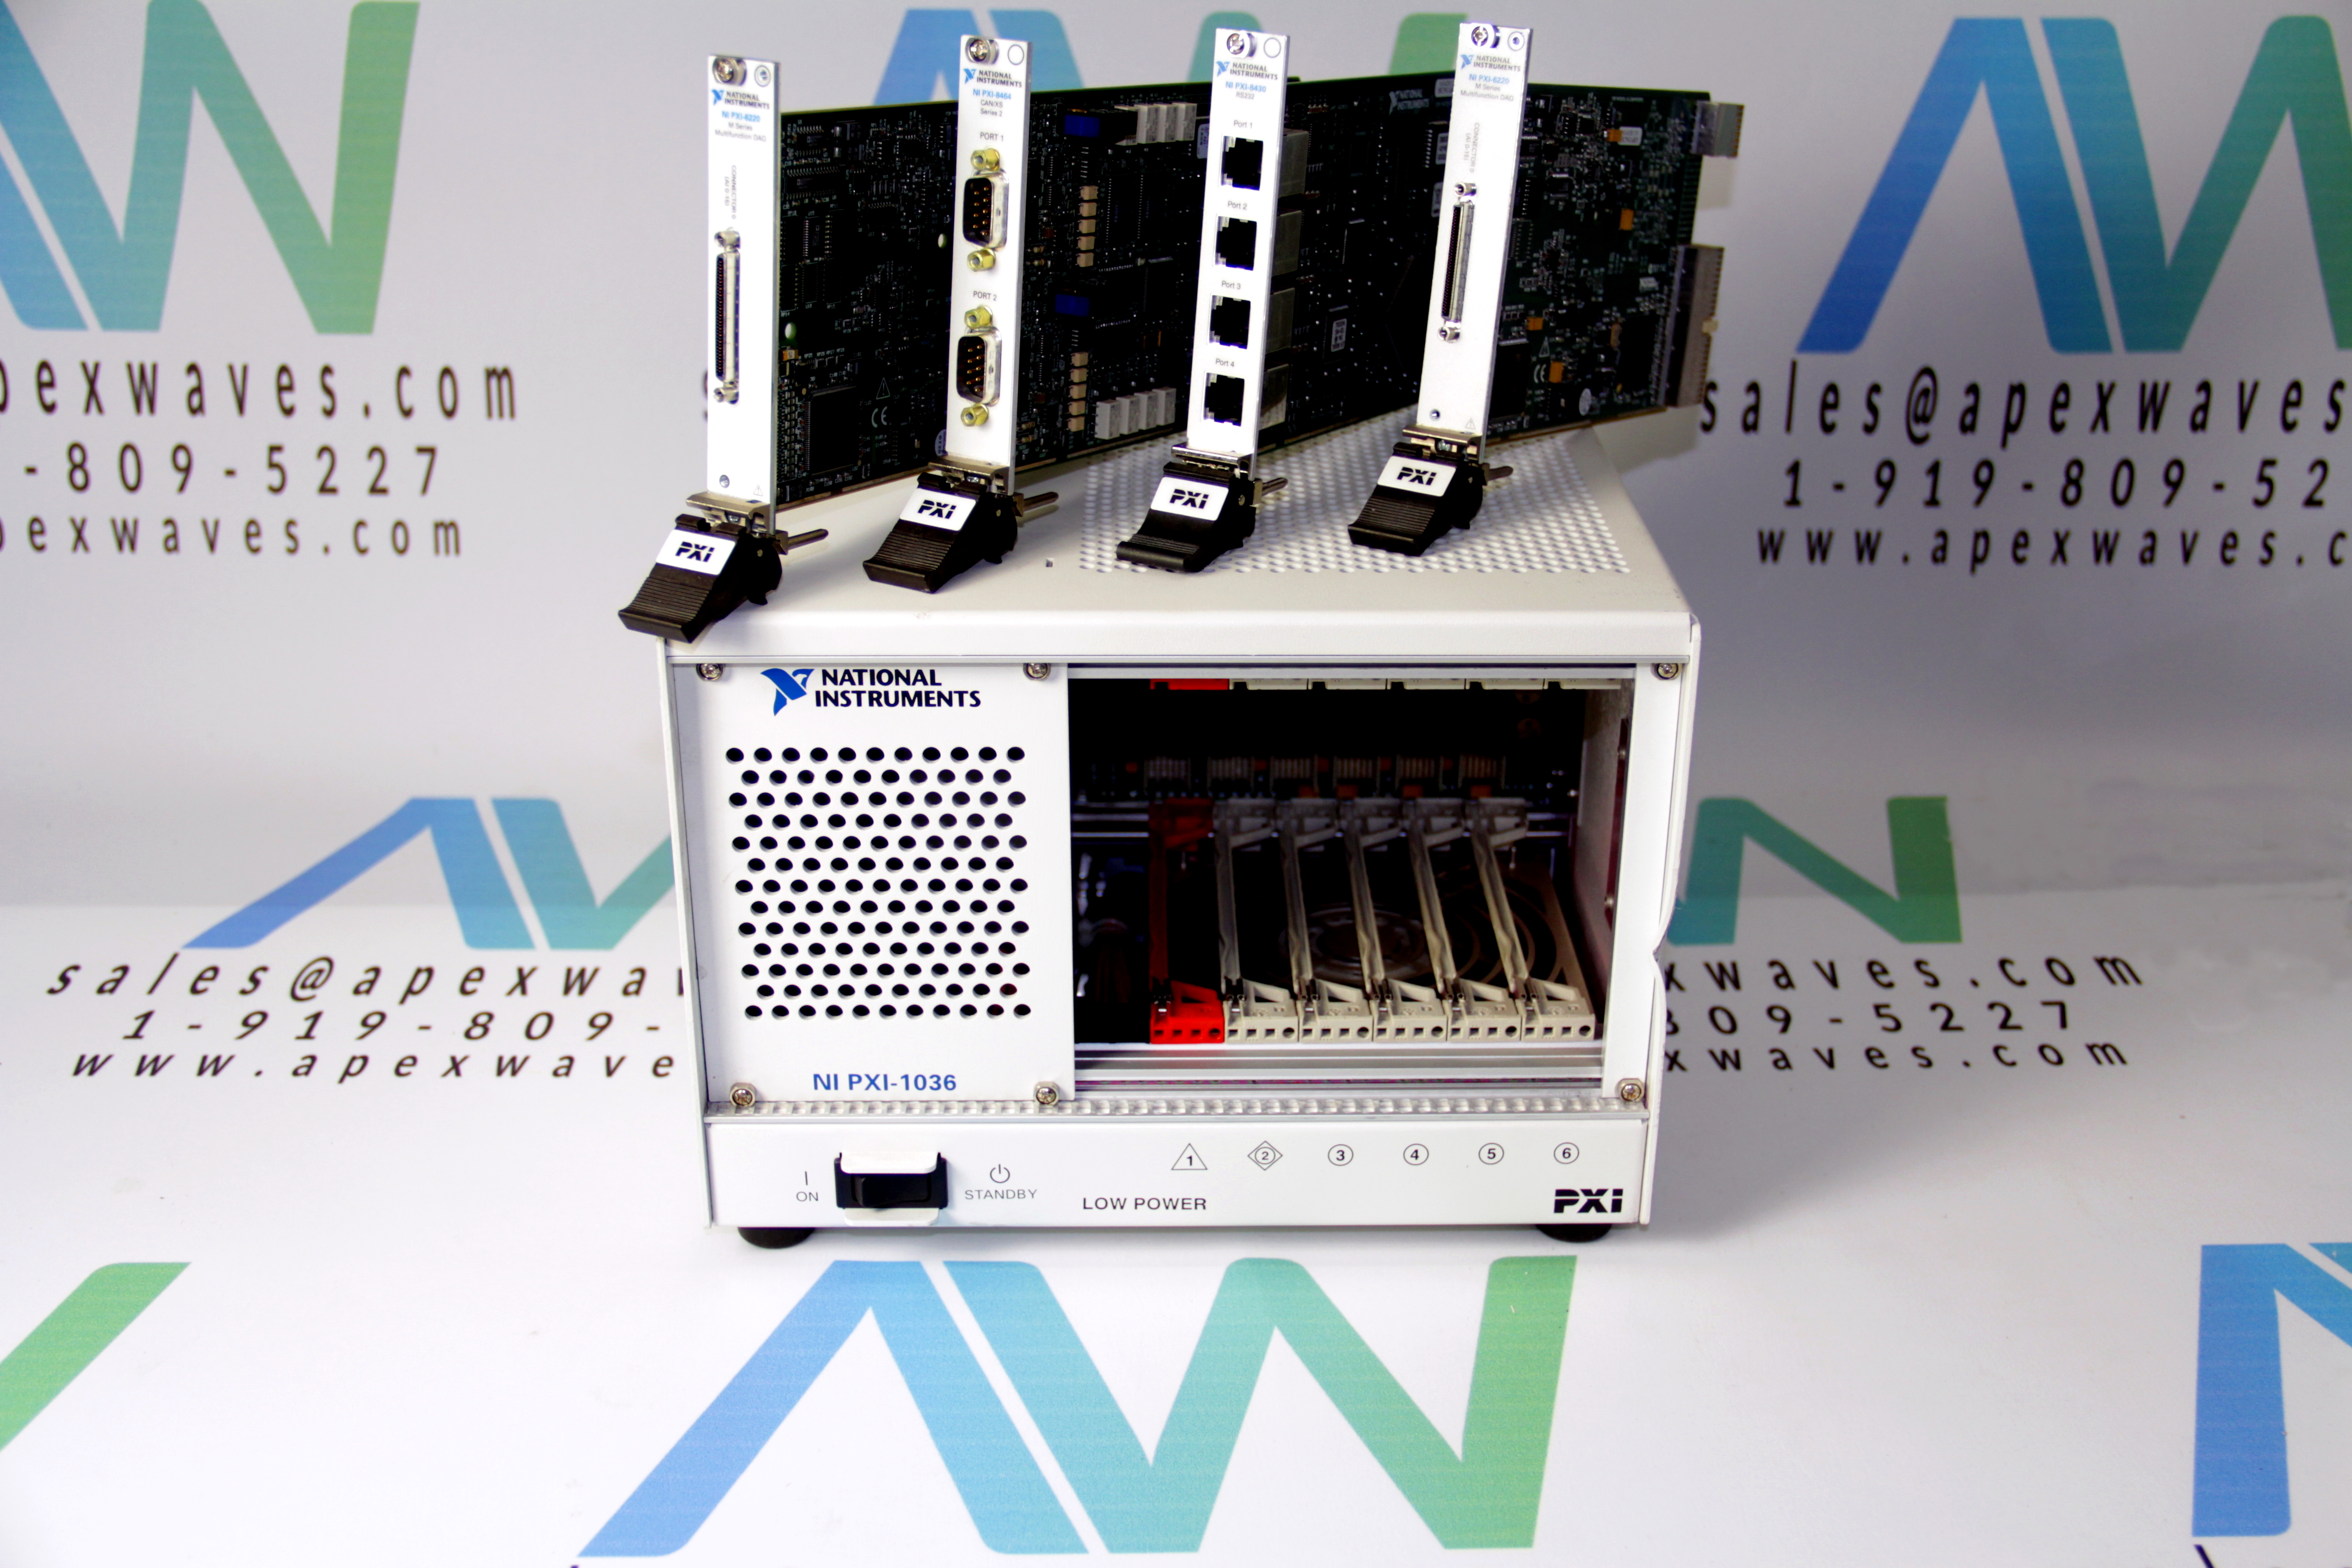 4 PXI cards on top of a PXI-1036 Chassis from NI with an Apex Waves logo backdrop